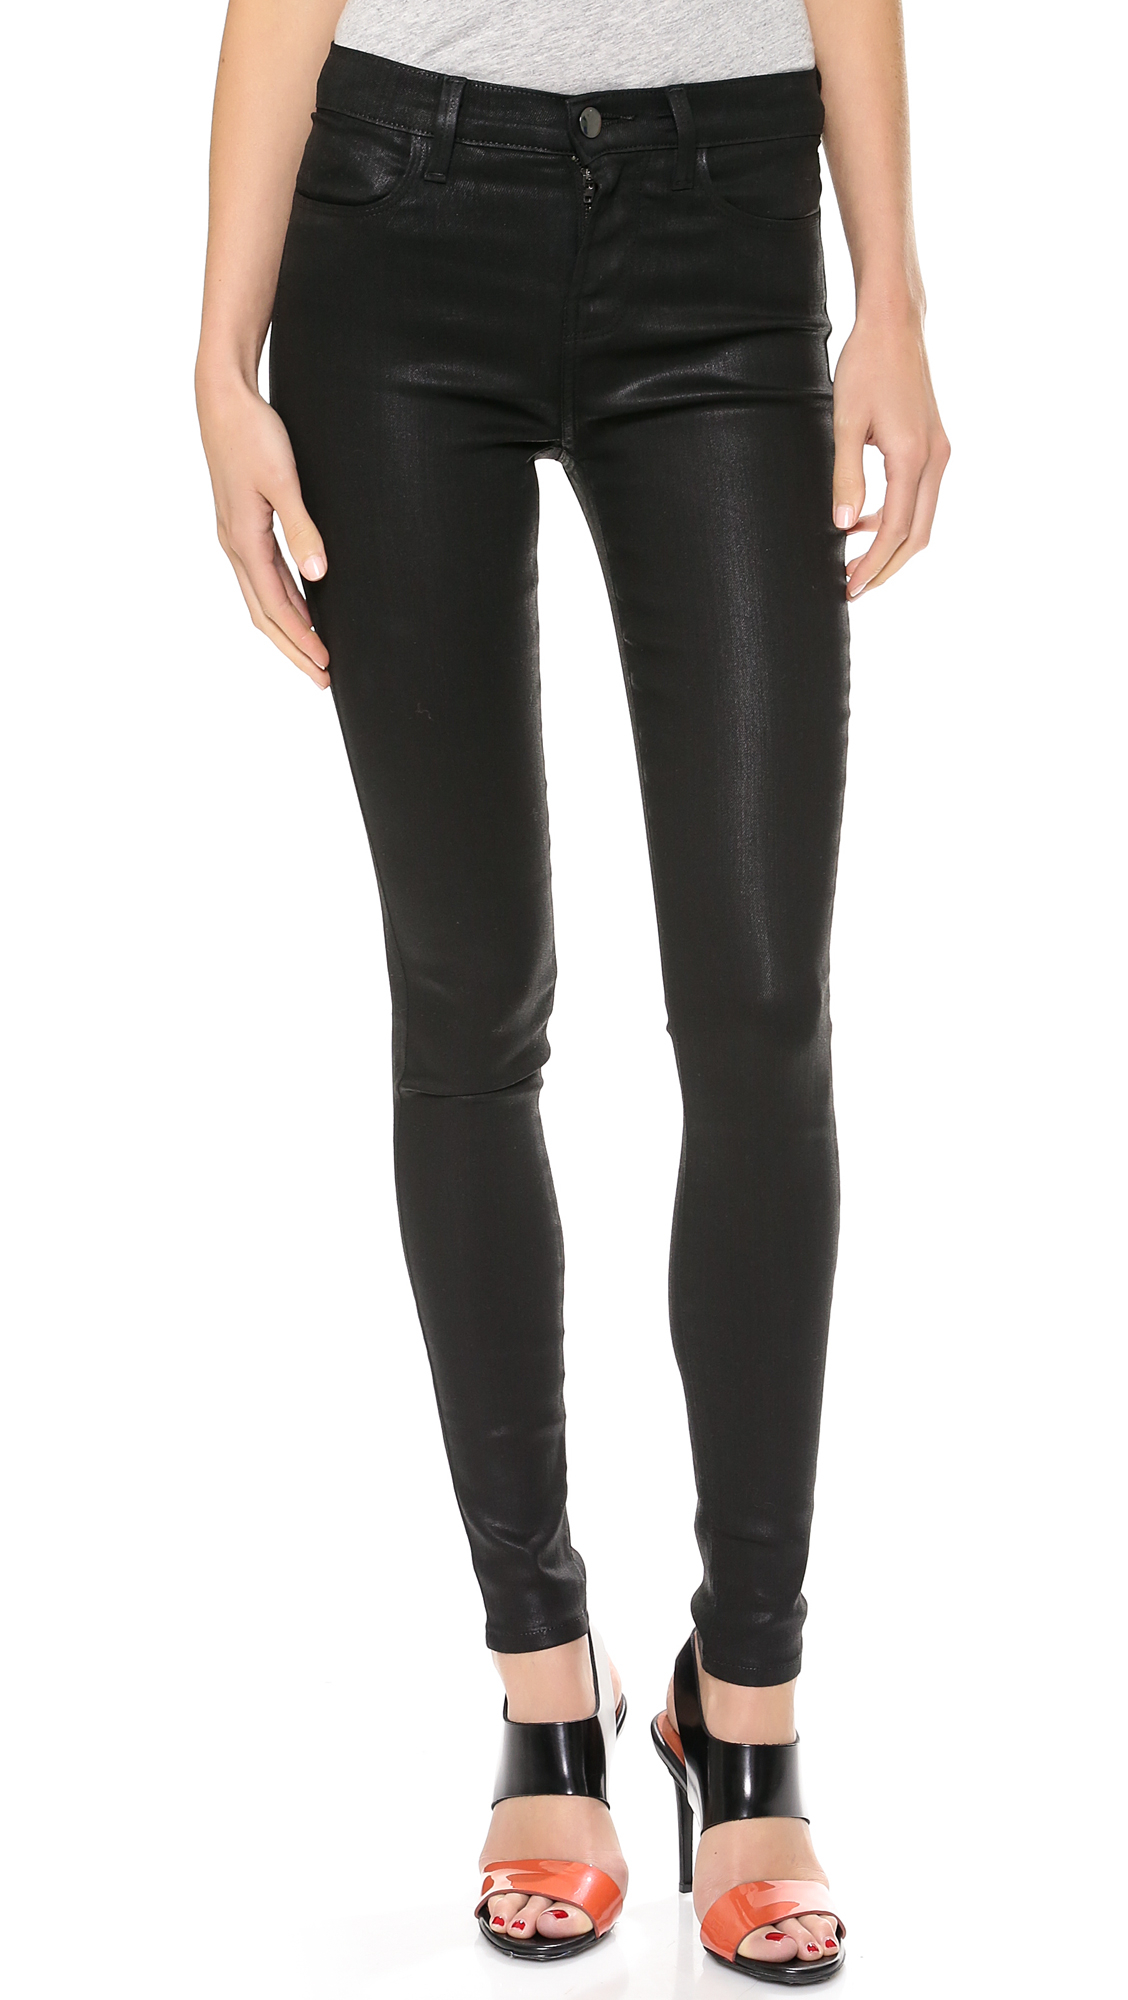 J Brand 23110 High Rise Coated Jeans - Fearless in Black